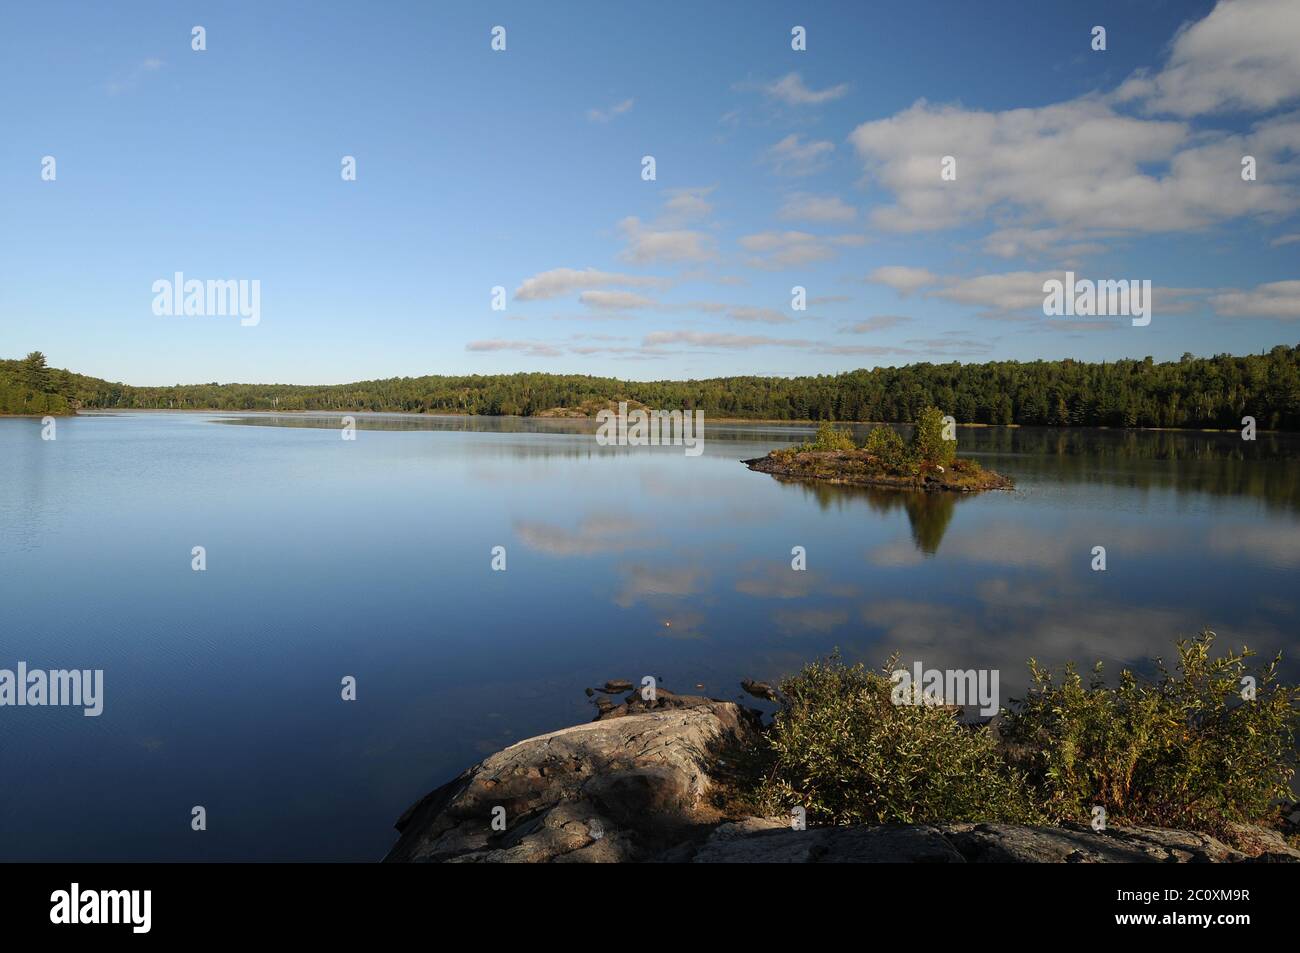 Summer scenery lake with blue sky and whit fluffy clouds reflection on the water displaying its summer season in a peaceful moment. Stock Photo